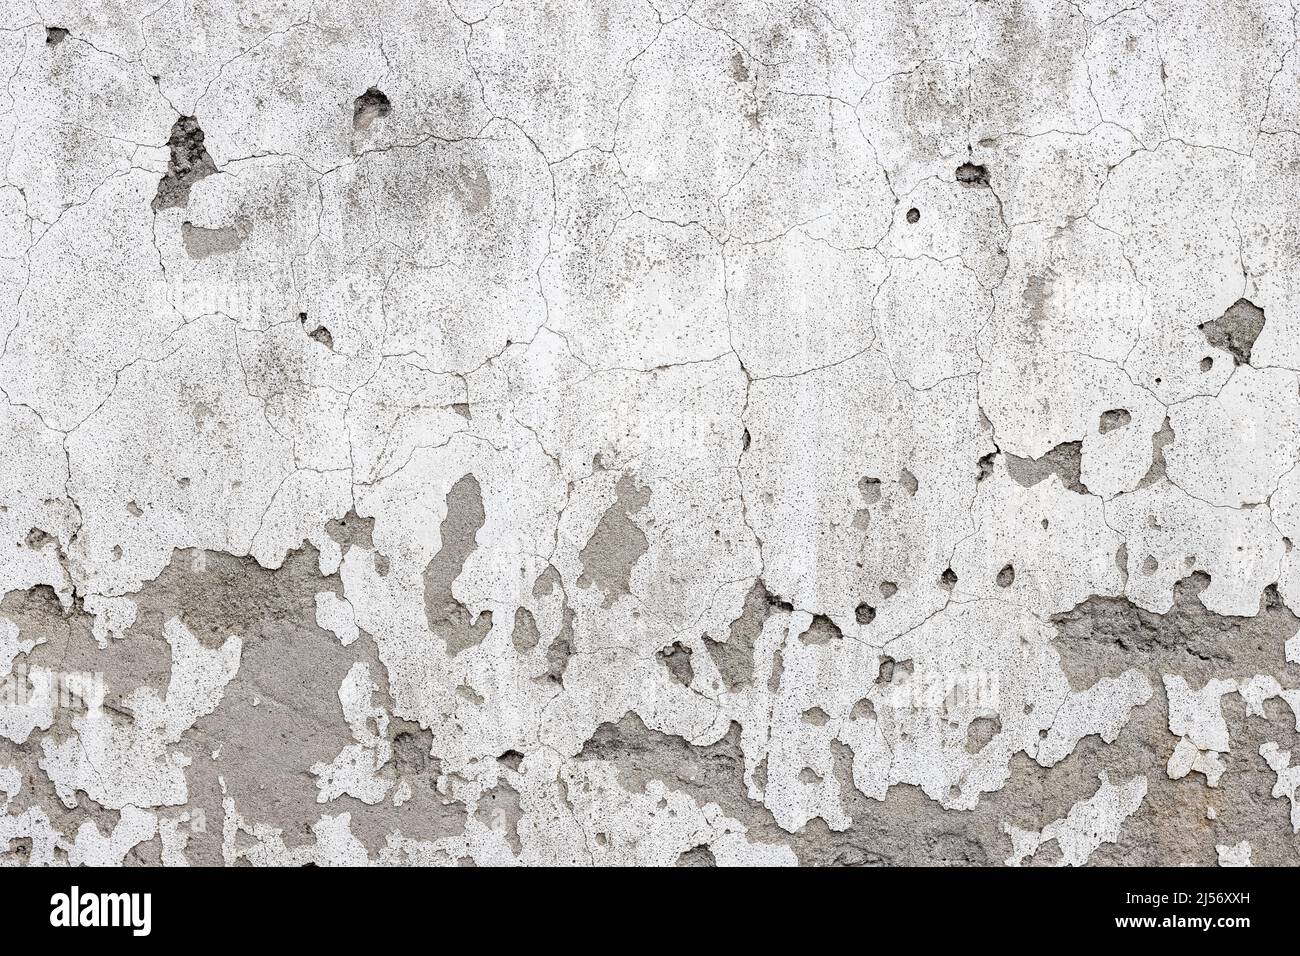 Old damaged concrete wall with cracks and grunge textures Stock Photo